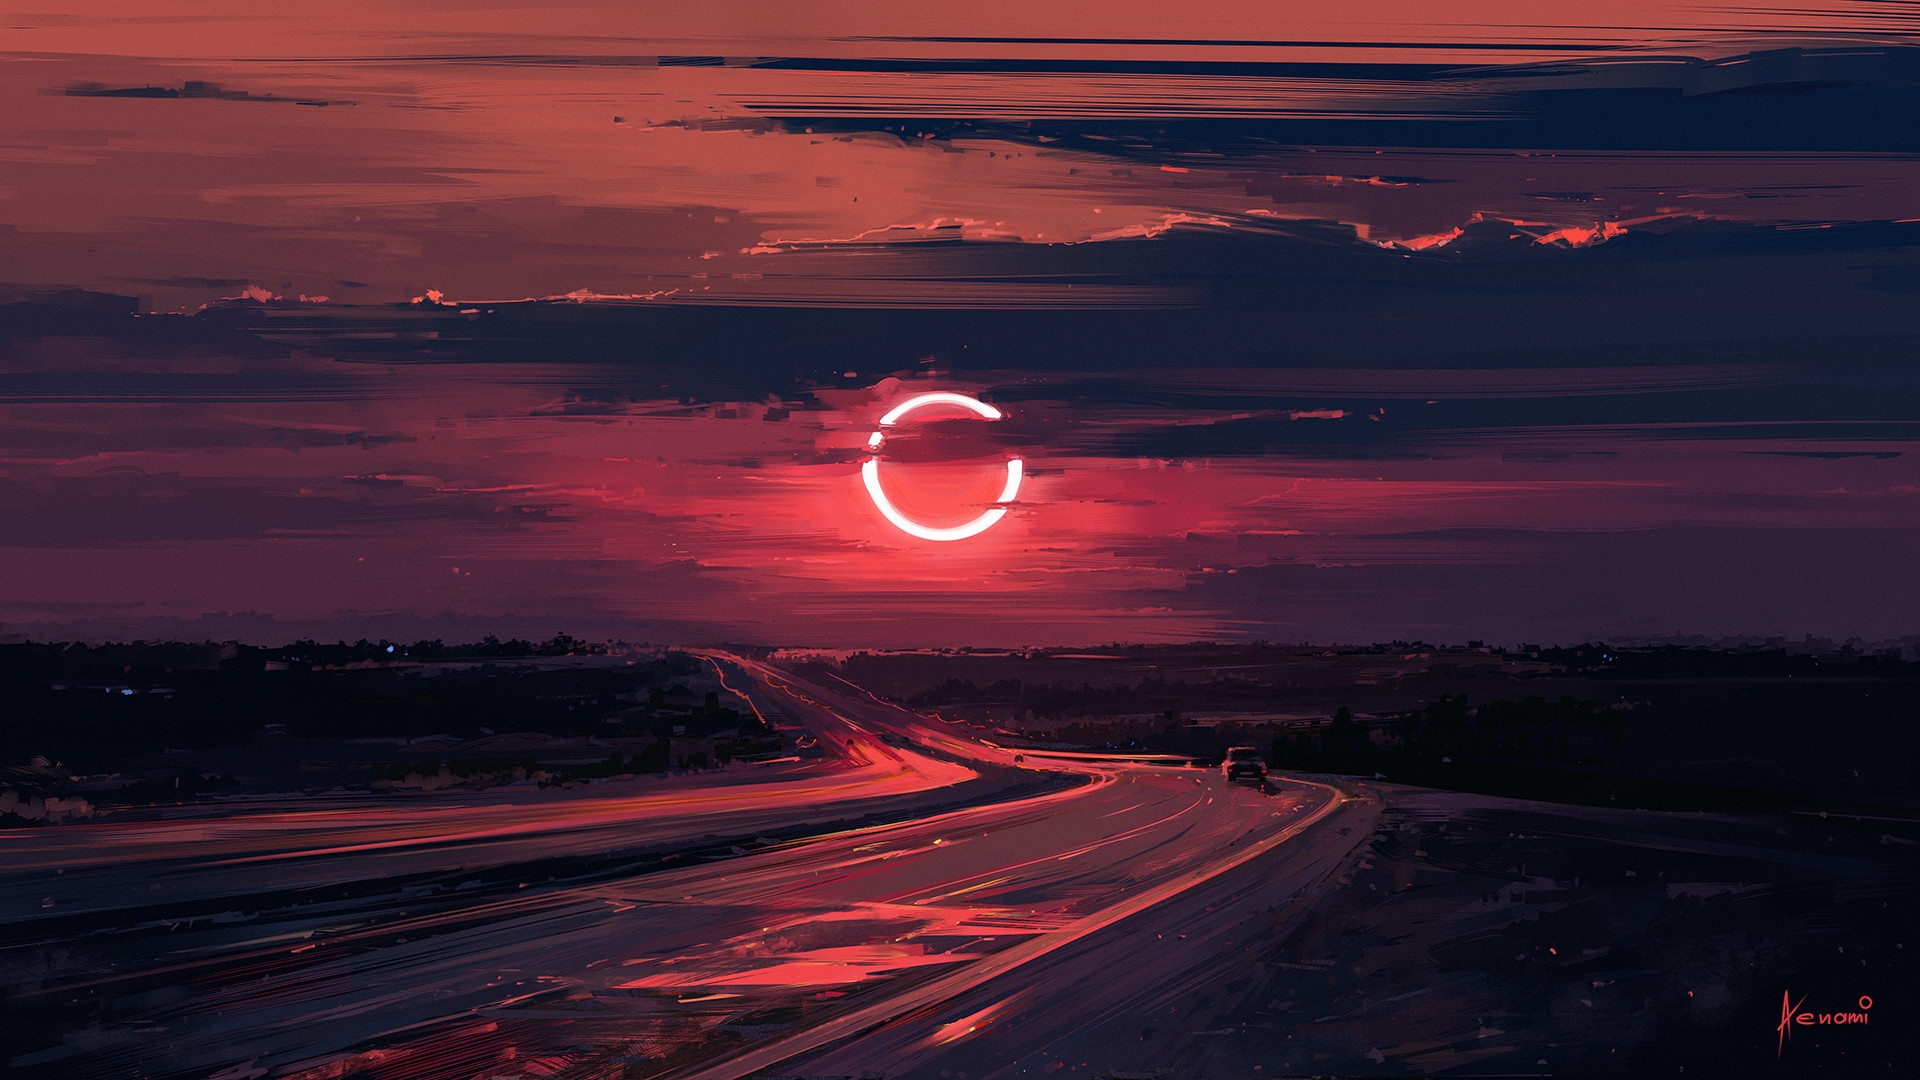 Red Moon Wallpapers